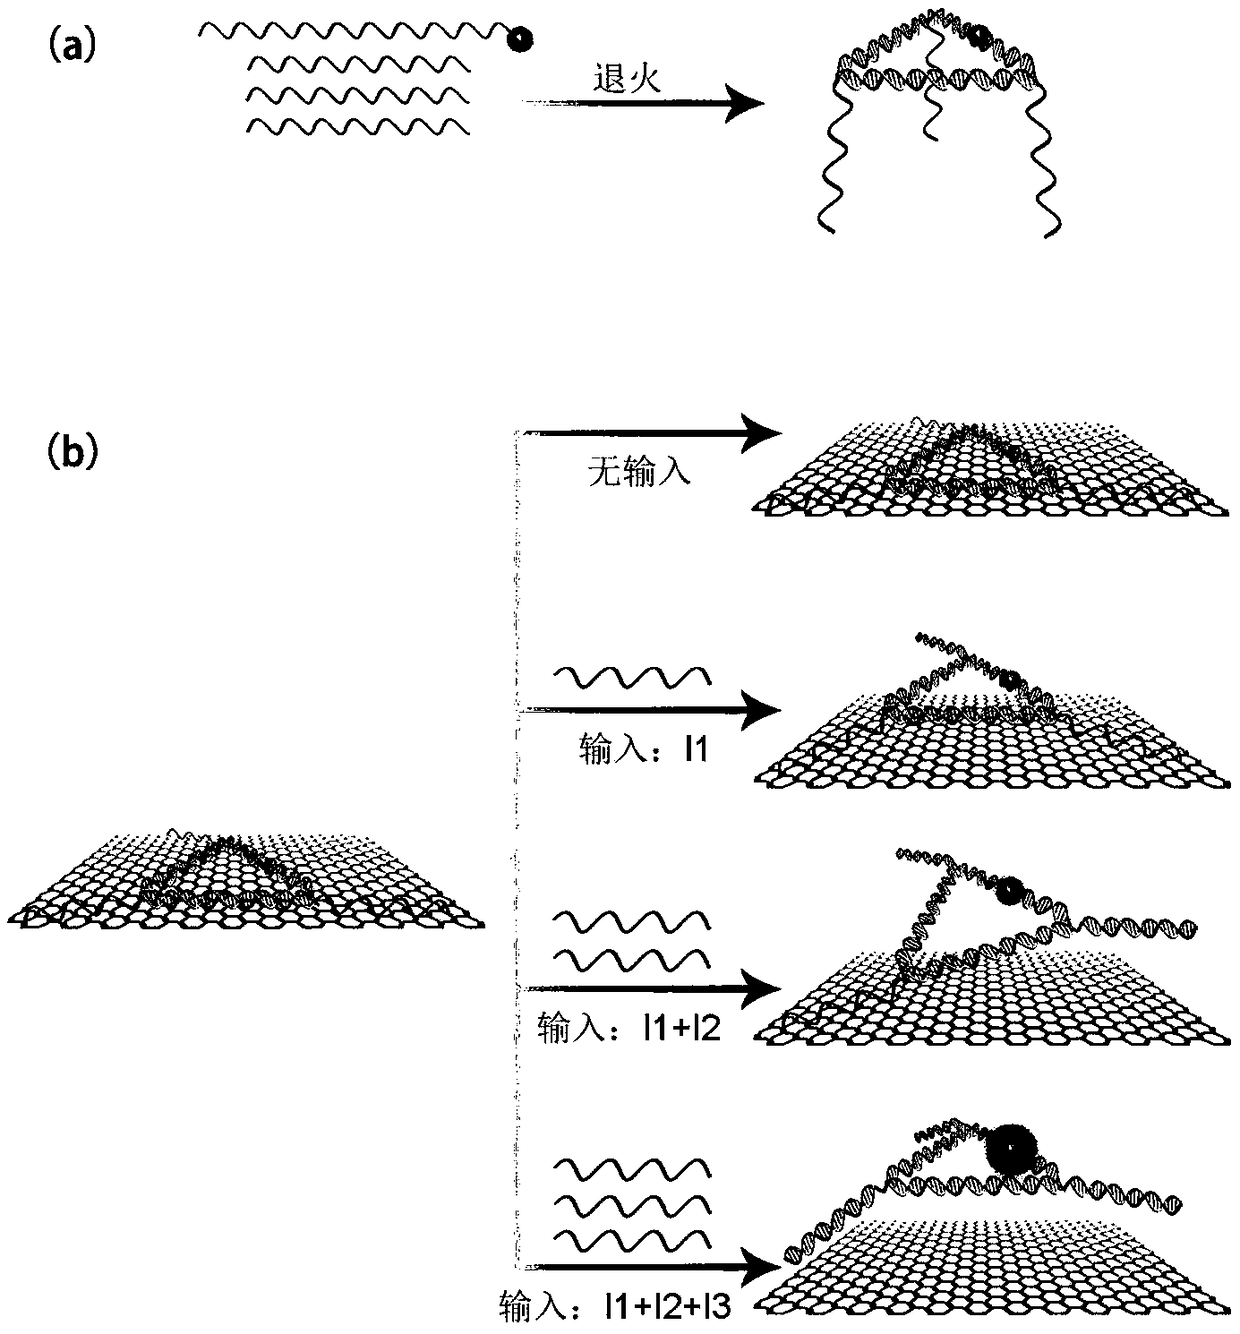 DNA nano tripod-based molecular logic gate for regulating interaction between fluorescent small molecule and graphene oxide and construction method thereof